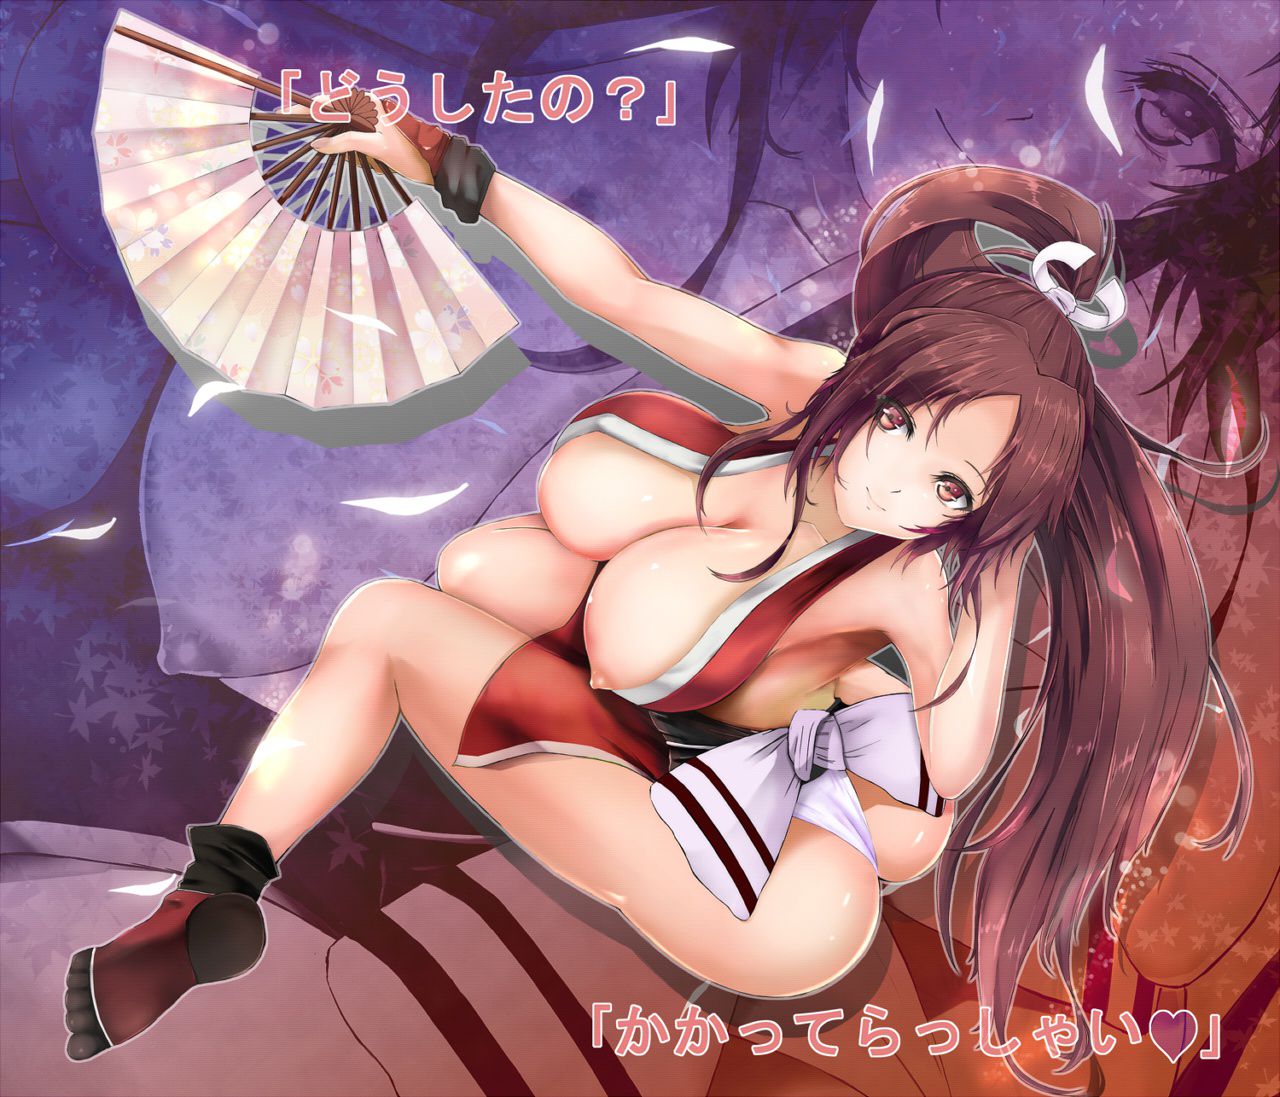 [The King of Fighters] secondary erotic image of Mai Shiranui condemning ah. 5